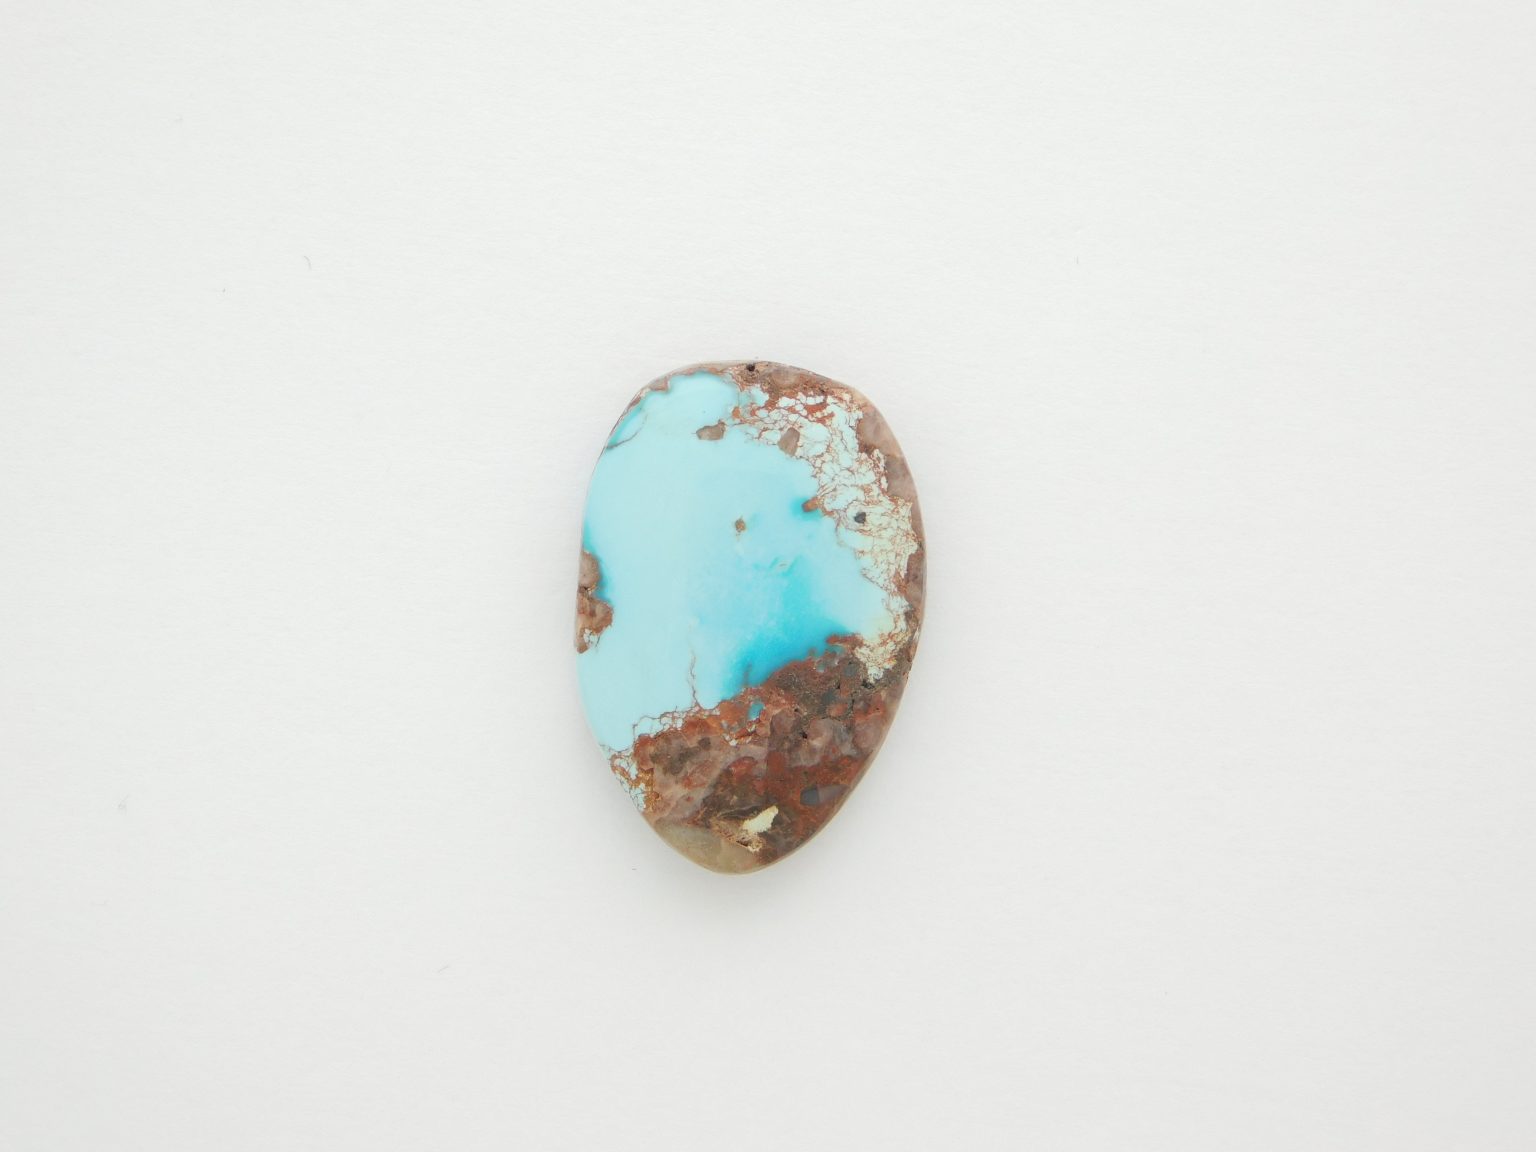 Bisbee Turquoise Cabochon 14.5 ct.